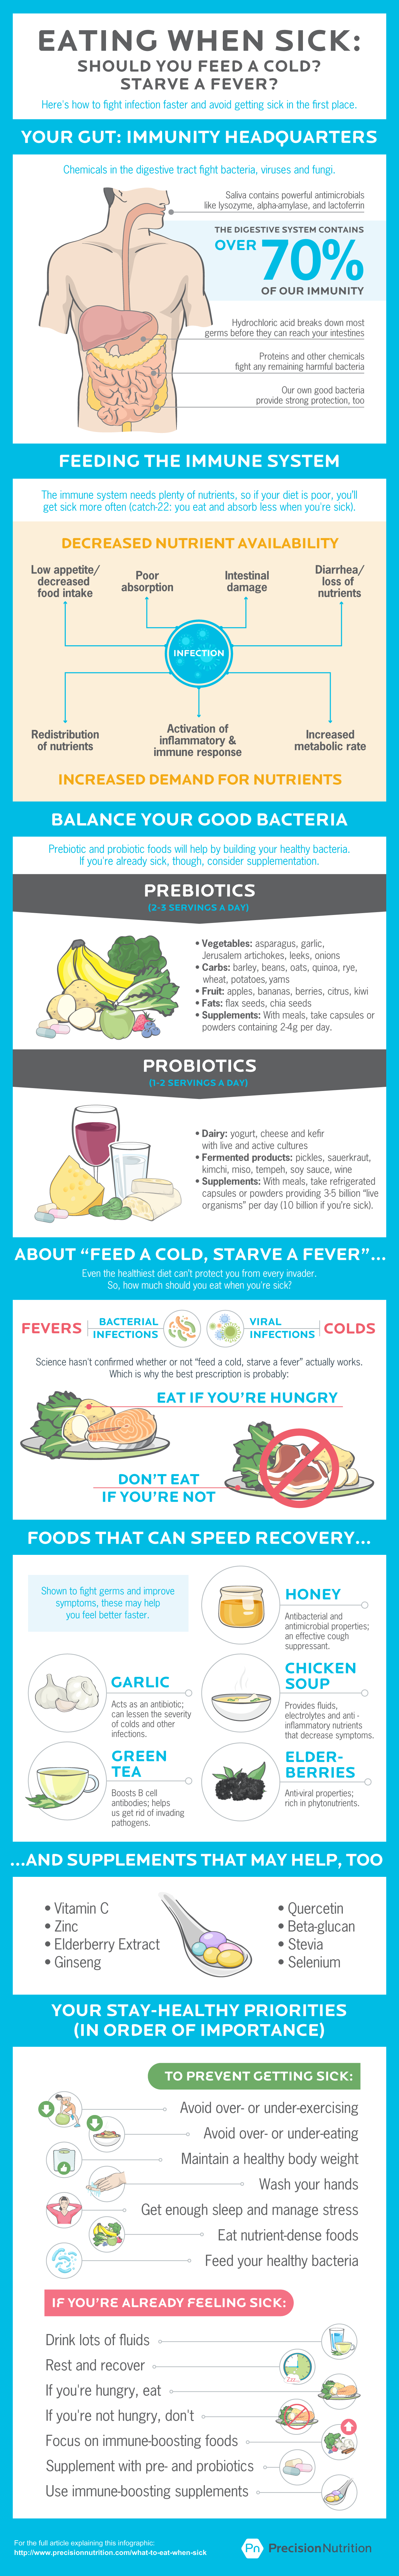 What Should You Eat When Sick